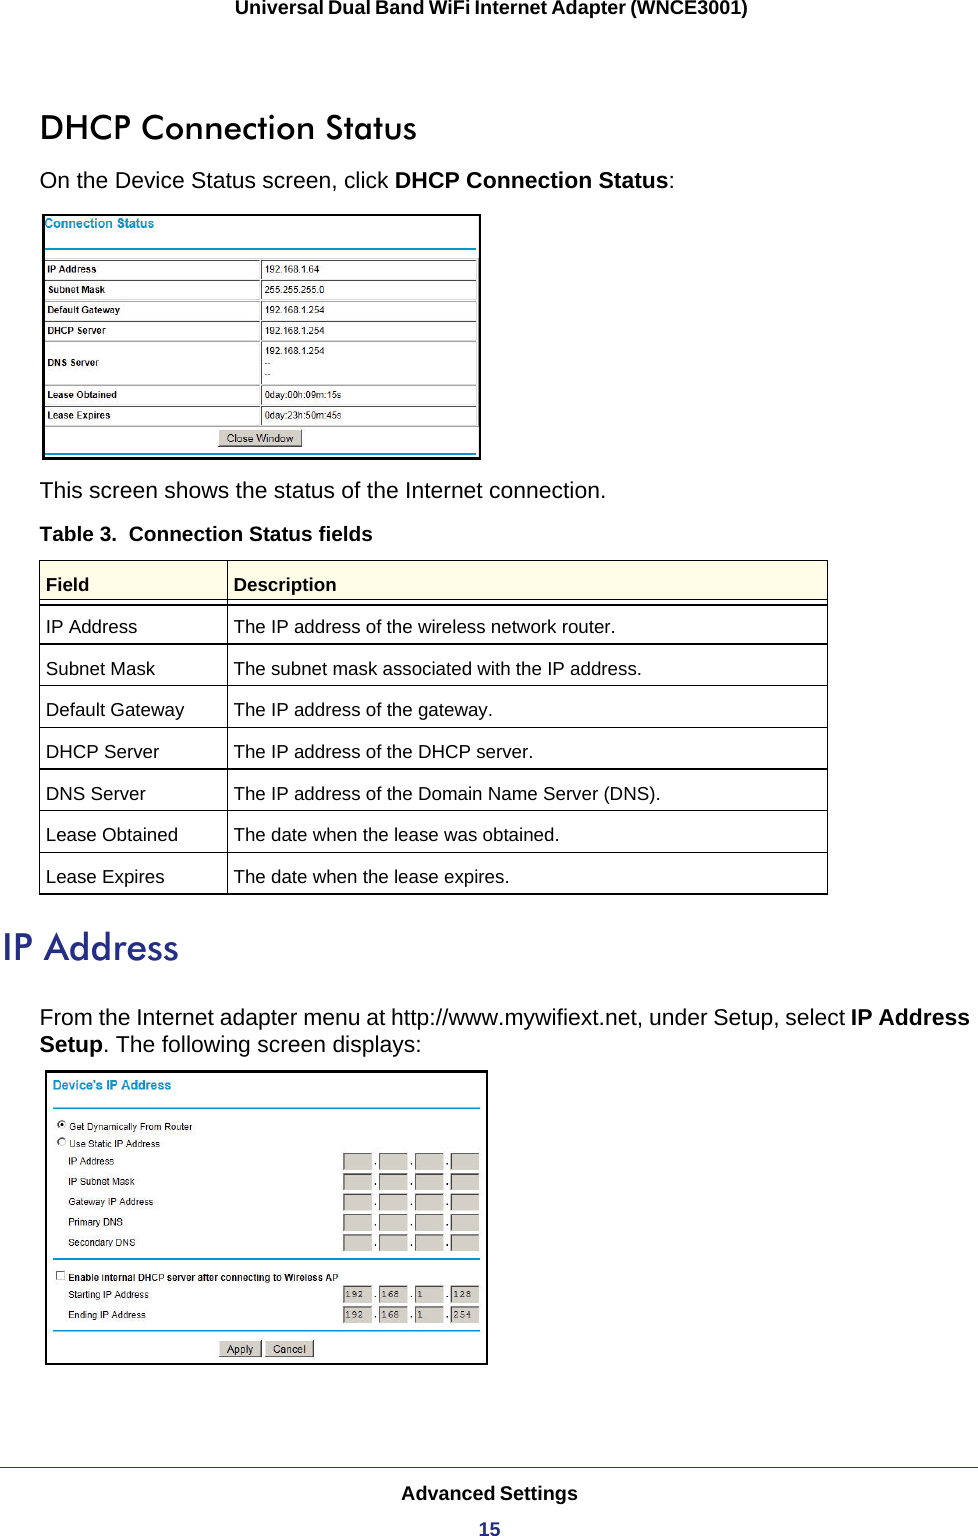 Advanced Settings15 Universal Dual Band WiFi Internet Adapter (WNCE3001)DHCP Connection StatusOn the Device Status screen, click DHCP Connection Status:This screen shows the status of the Internet connection.Table 3.  Connection Status fieldsField DescriptionIP Address The IP address of the wireless network router.Subnet Mask The subnet mask associated with the IP address.Default Gateway The IP address of the gateway.DHCP Server The IP address of the DHCP server.DNS Server The IP address of the Domain Name Server (DNS).Lease Obtained The date when the lease was obtained.Lease Expires The date when the lease expires.IP AddressFrom the Internet adapter menu at http://www.mywifiext.net, under Setup, select IP Address Setup. The following screen displays: